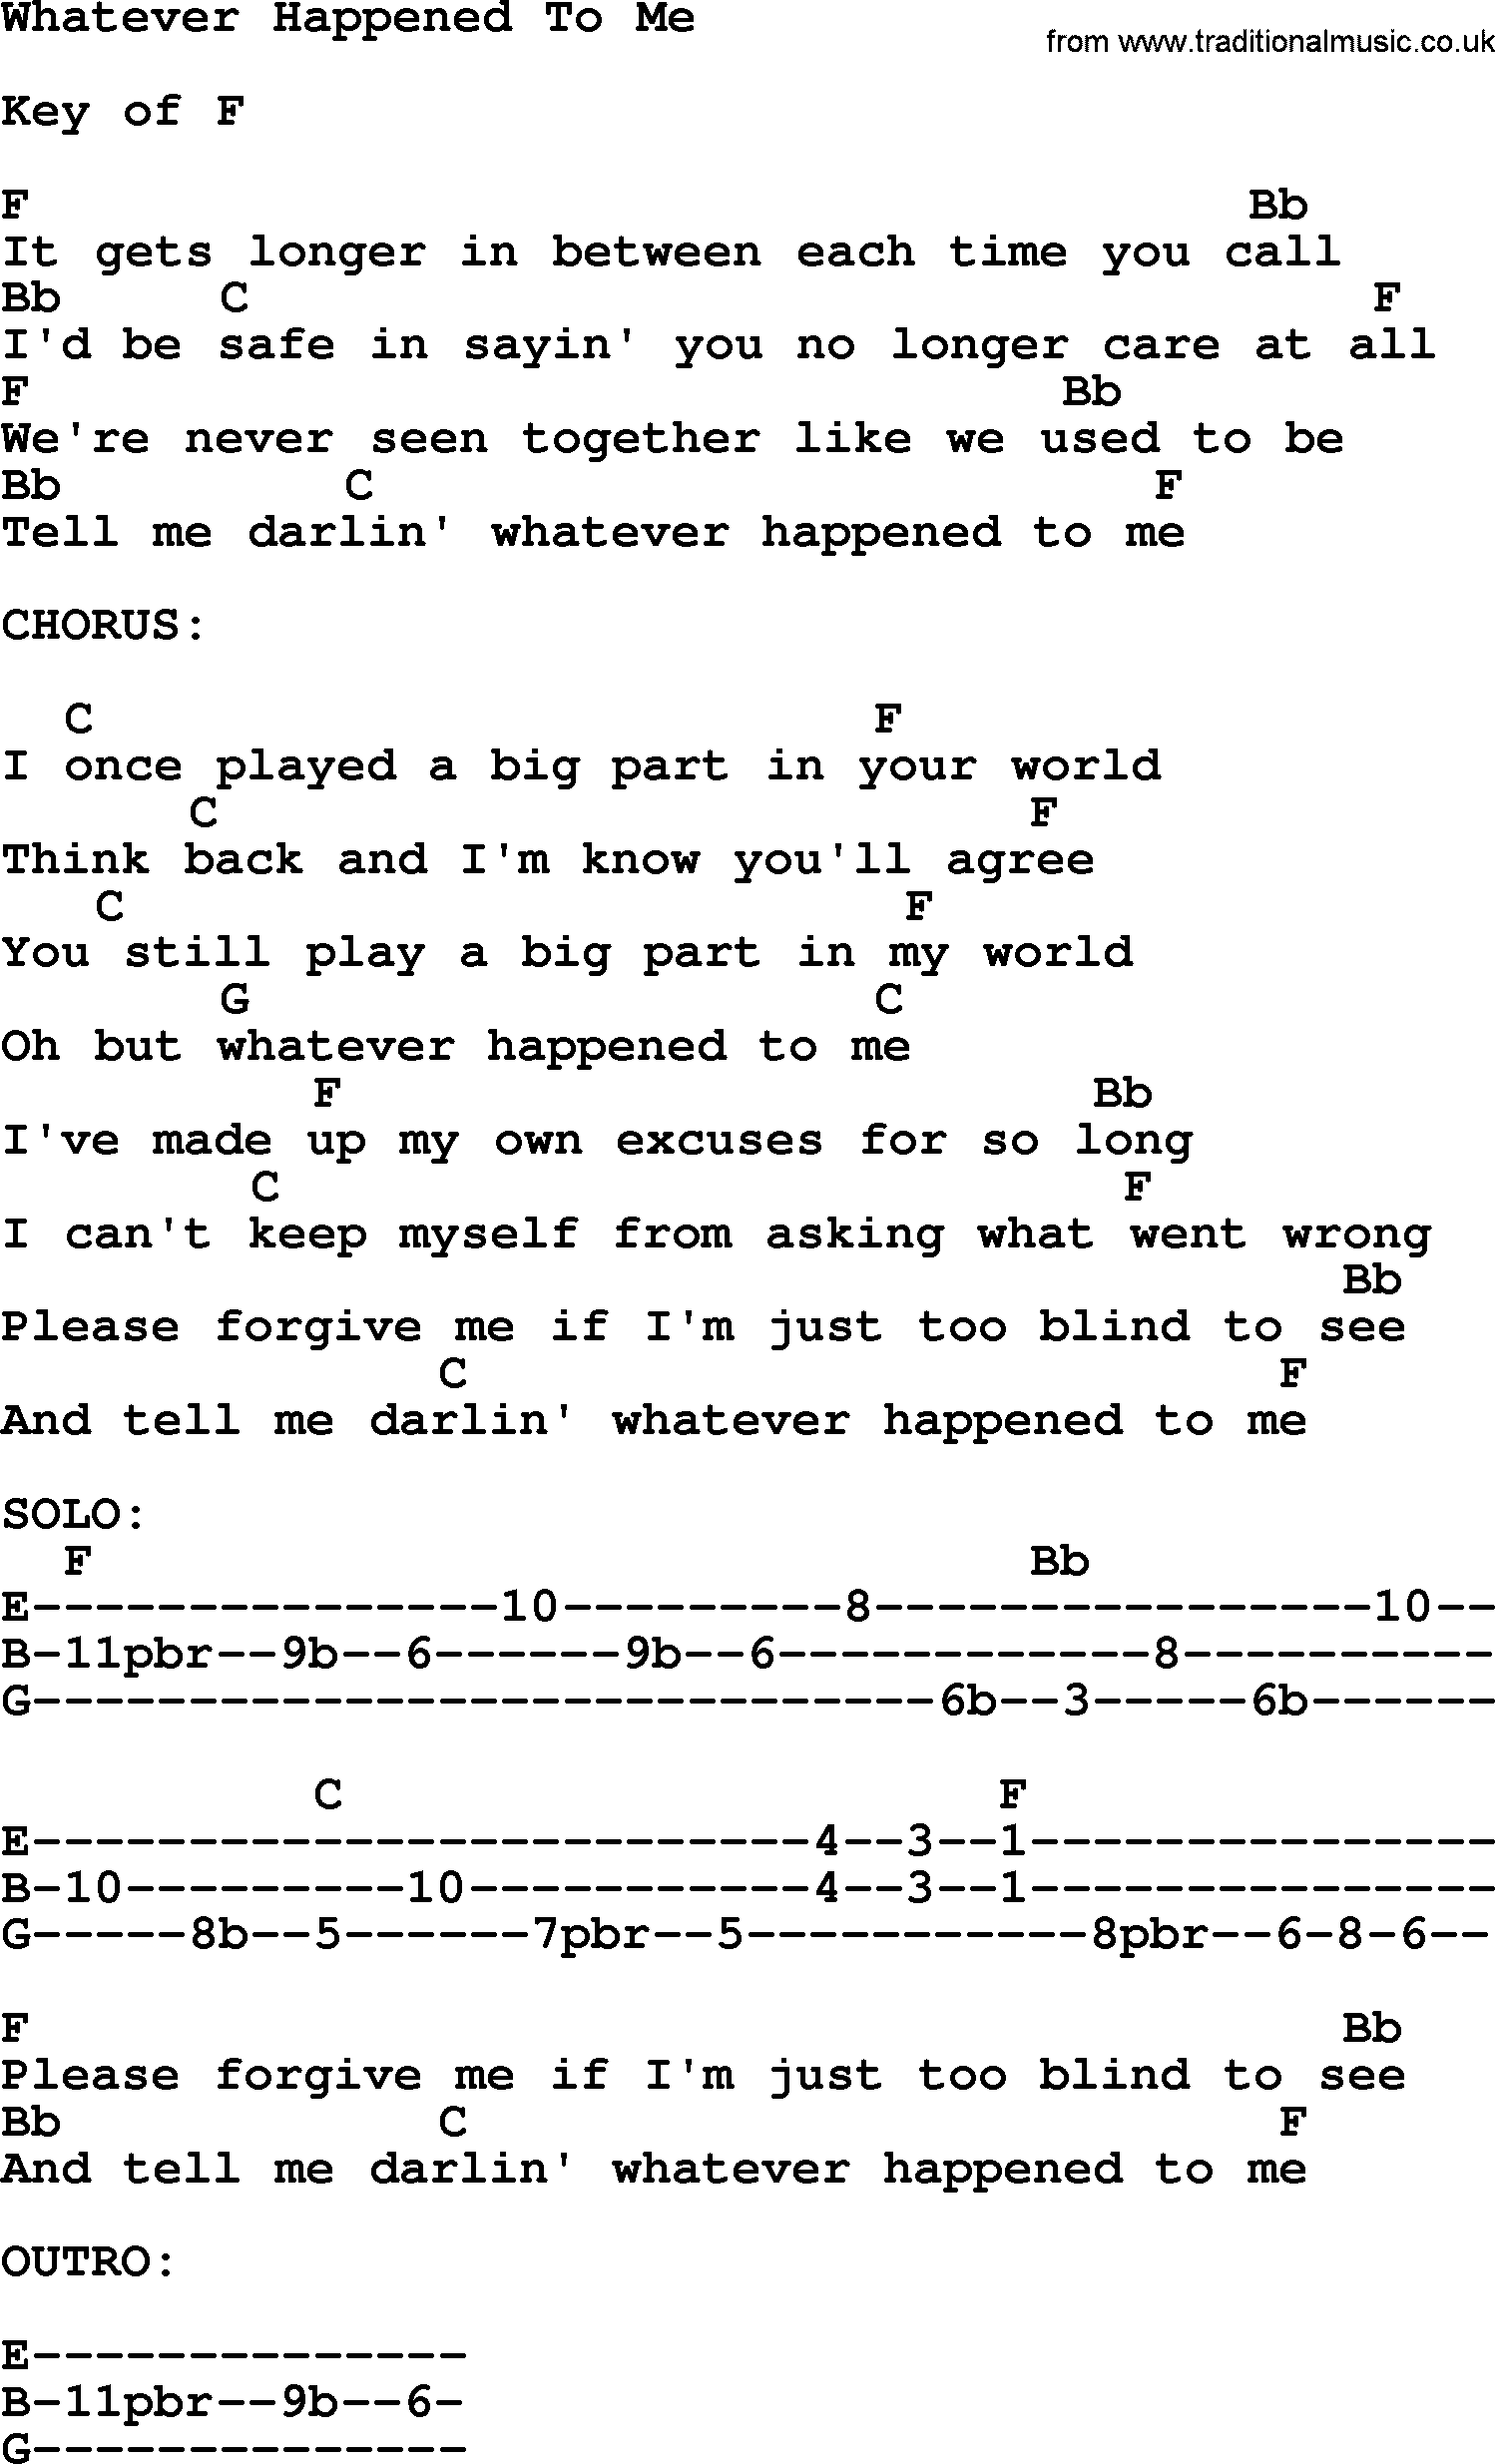 Merle Haggard song: Whatever Happened To Me, lyrics and chords